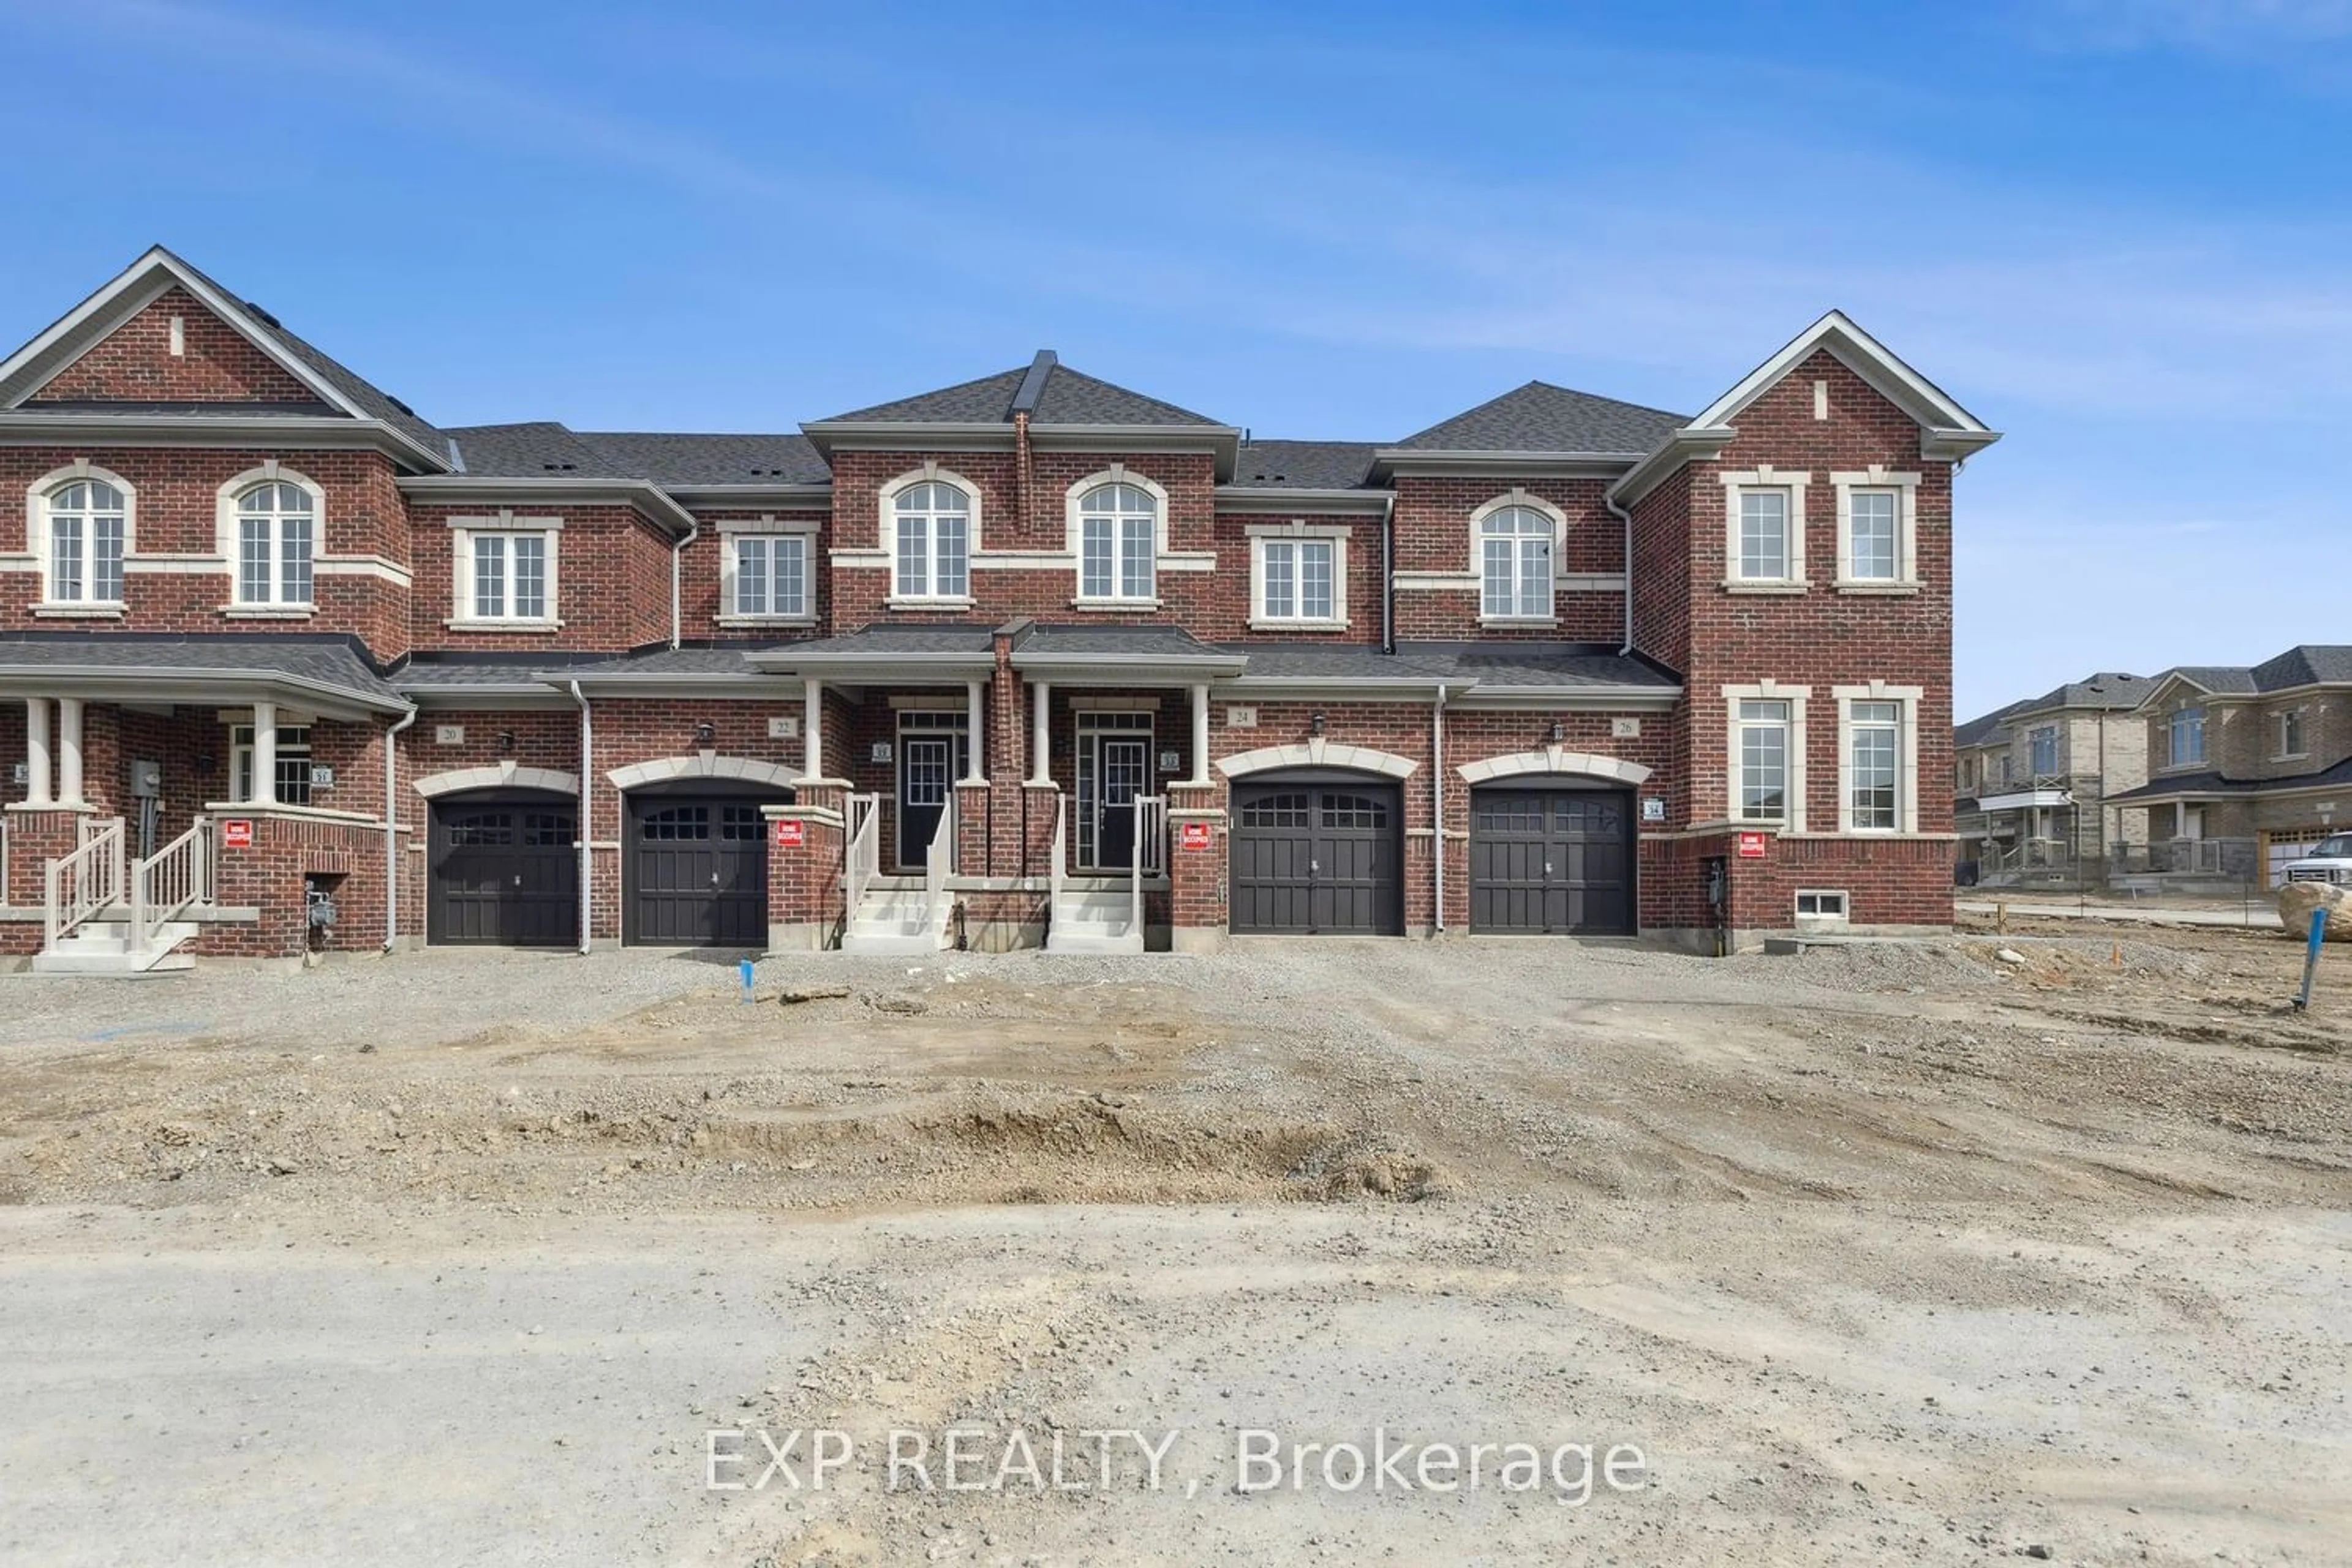 Home with brick exterior material for 24 Lidstone St, Cambridge Ontario N1T 0G3